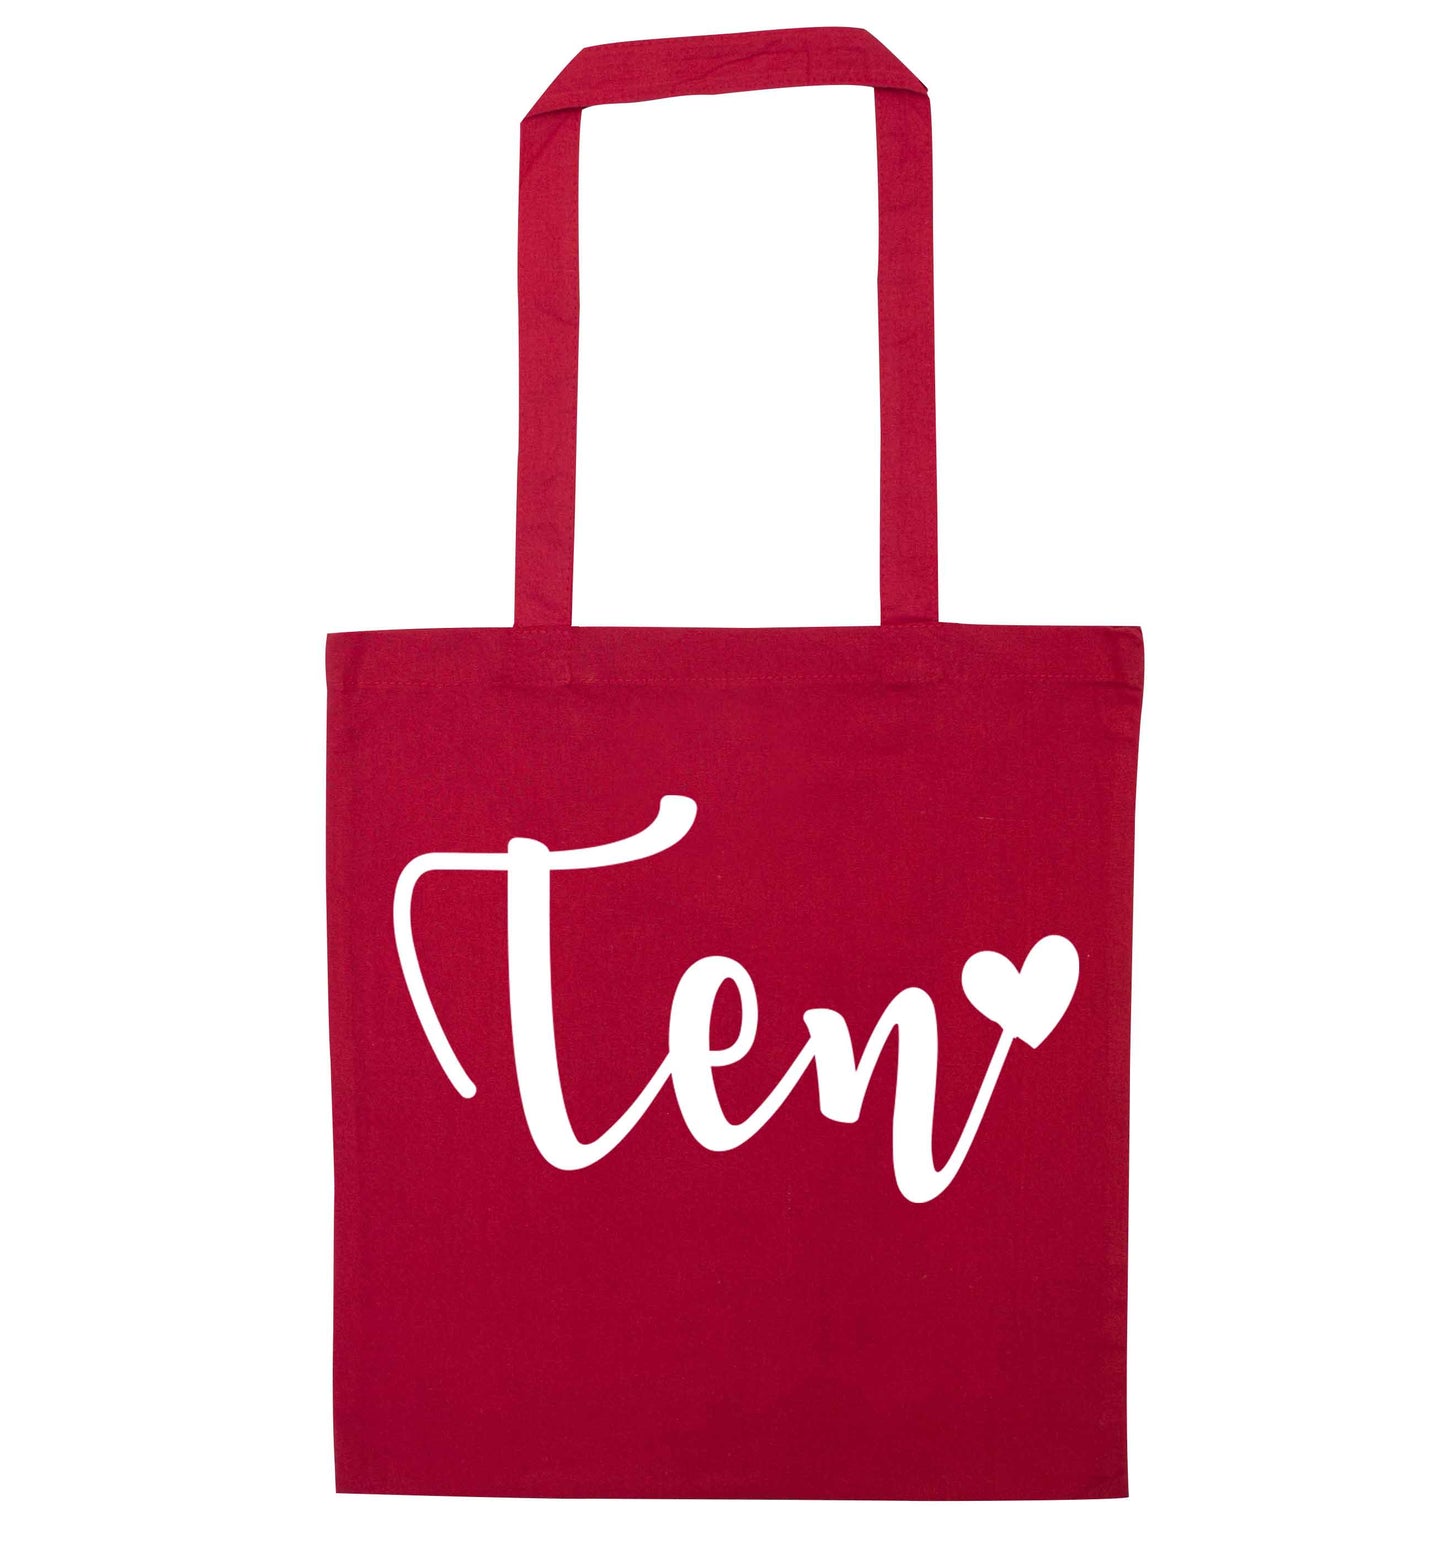 Ten and heart red tote bag